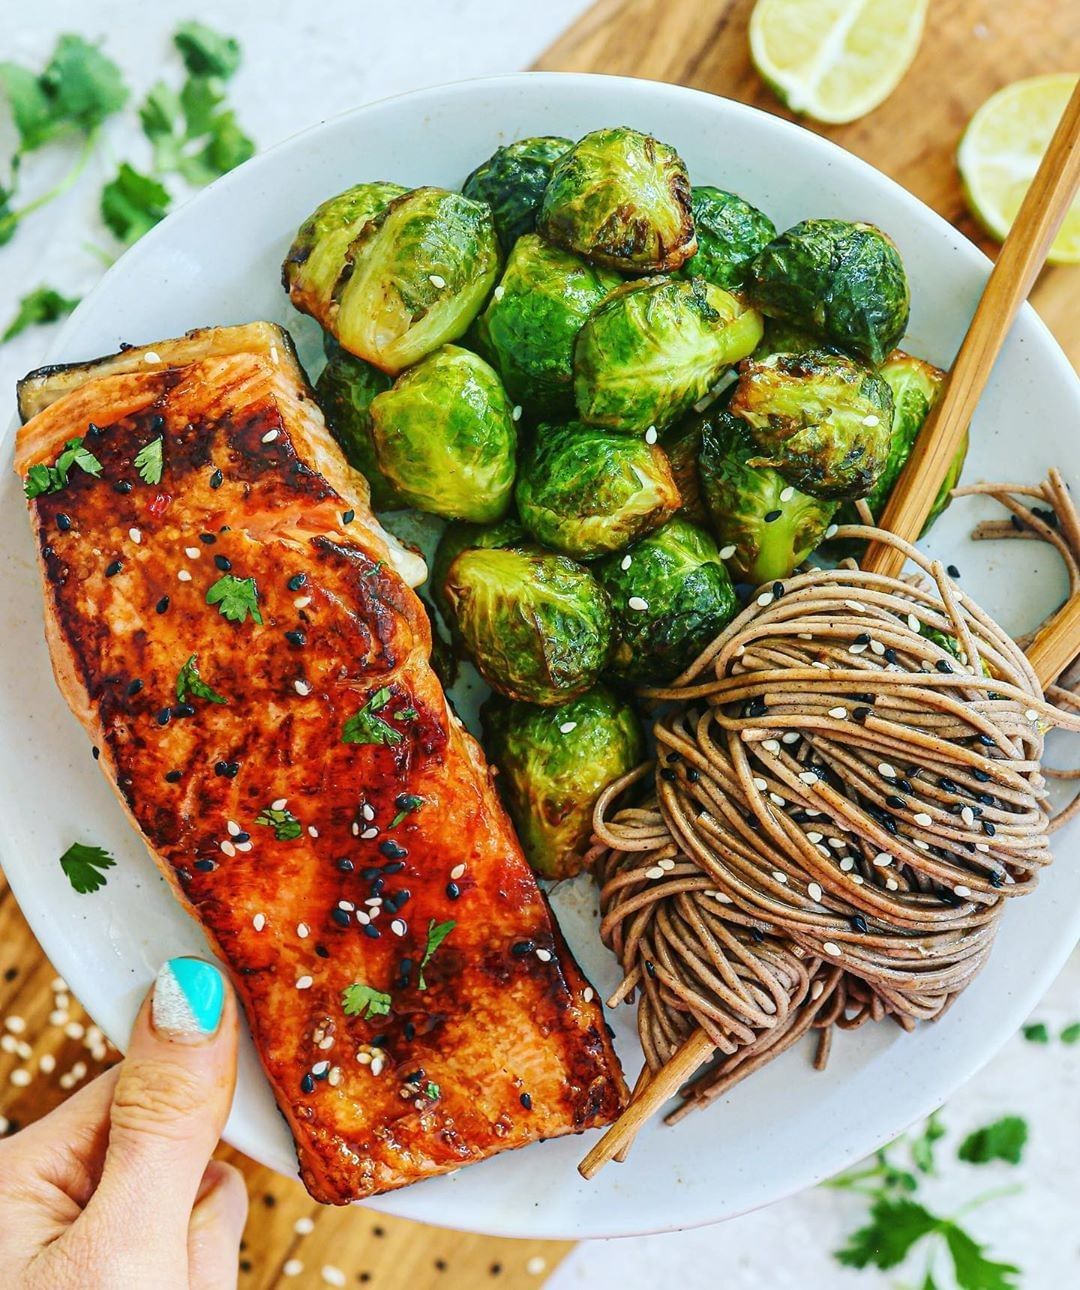 SWEET CHILI SALMON, SWEET AND SOUR BRUSSELS